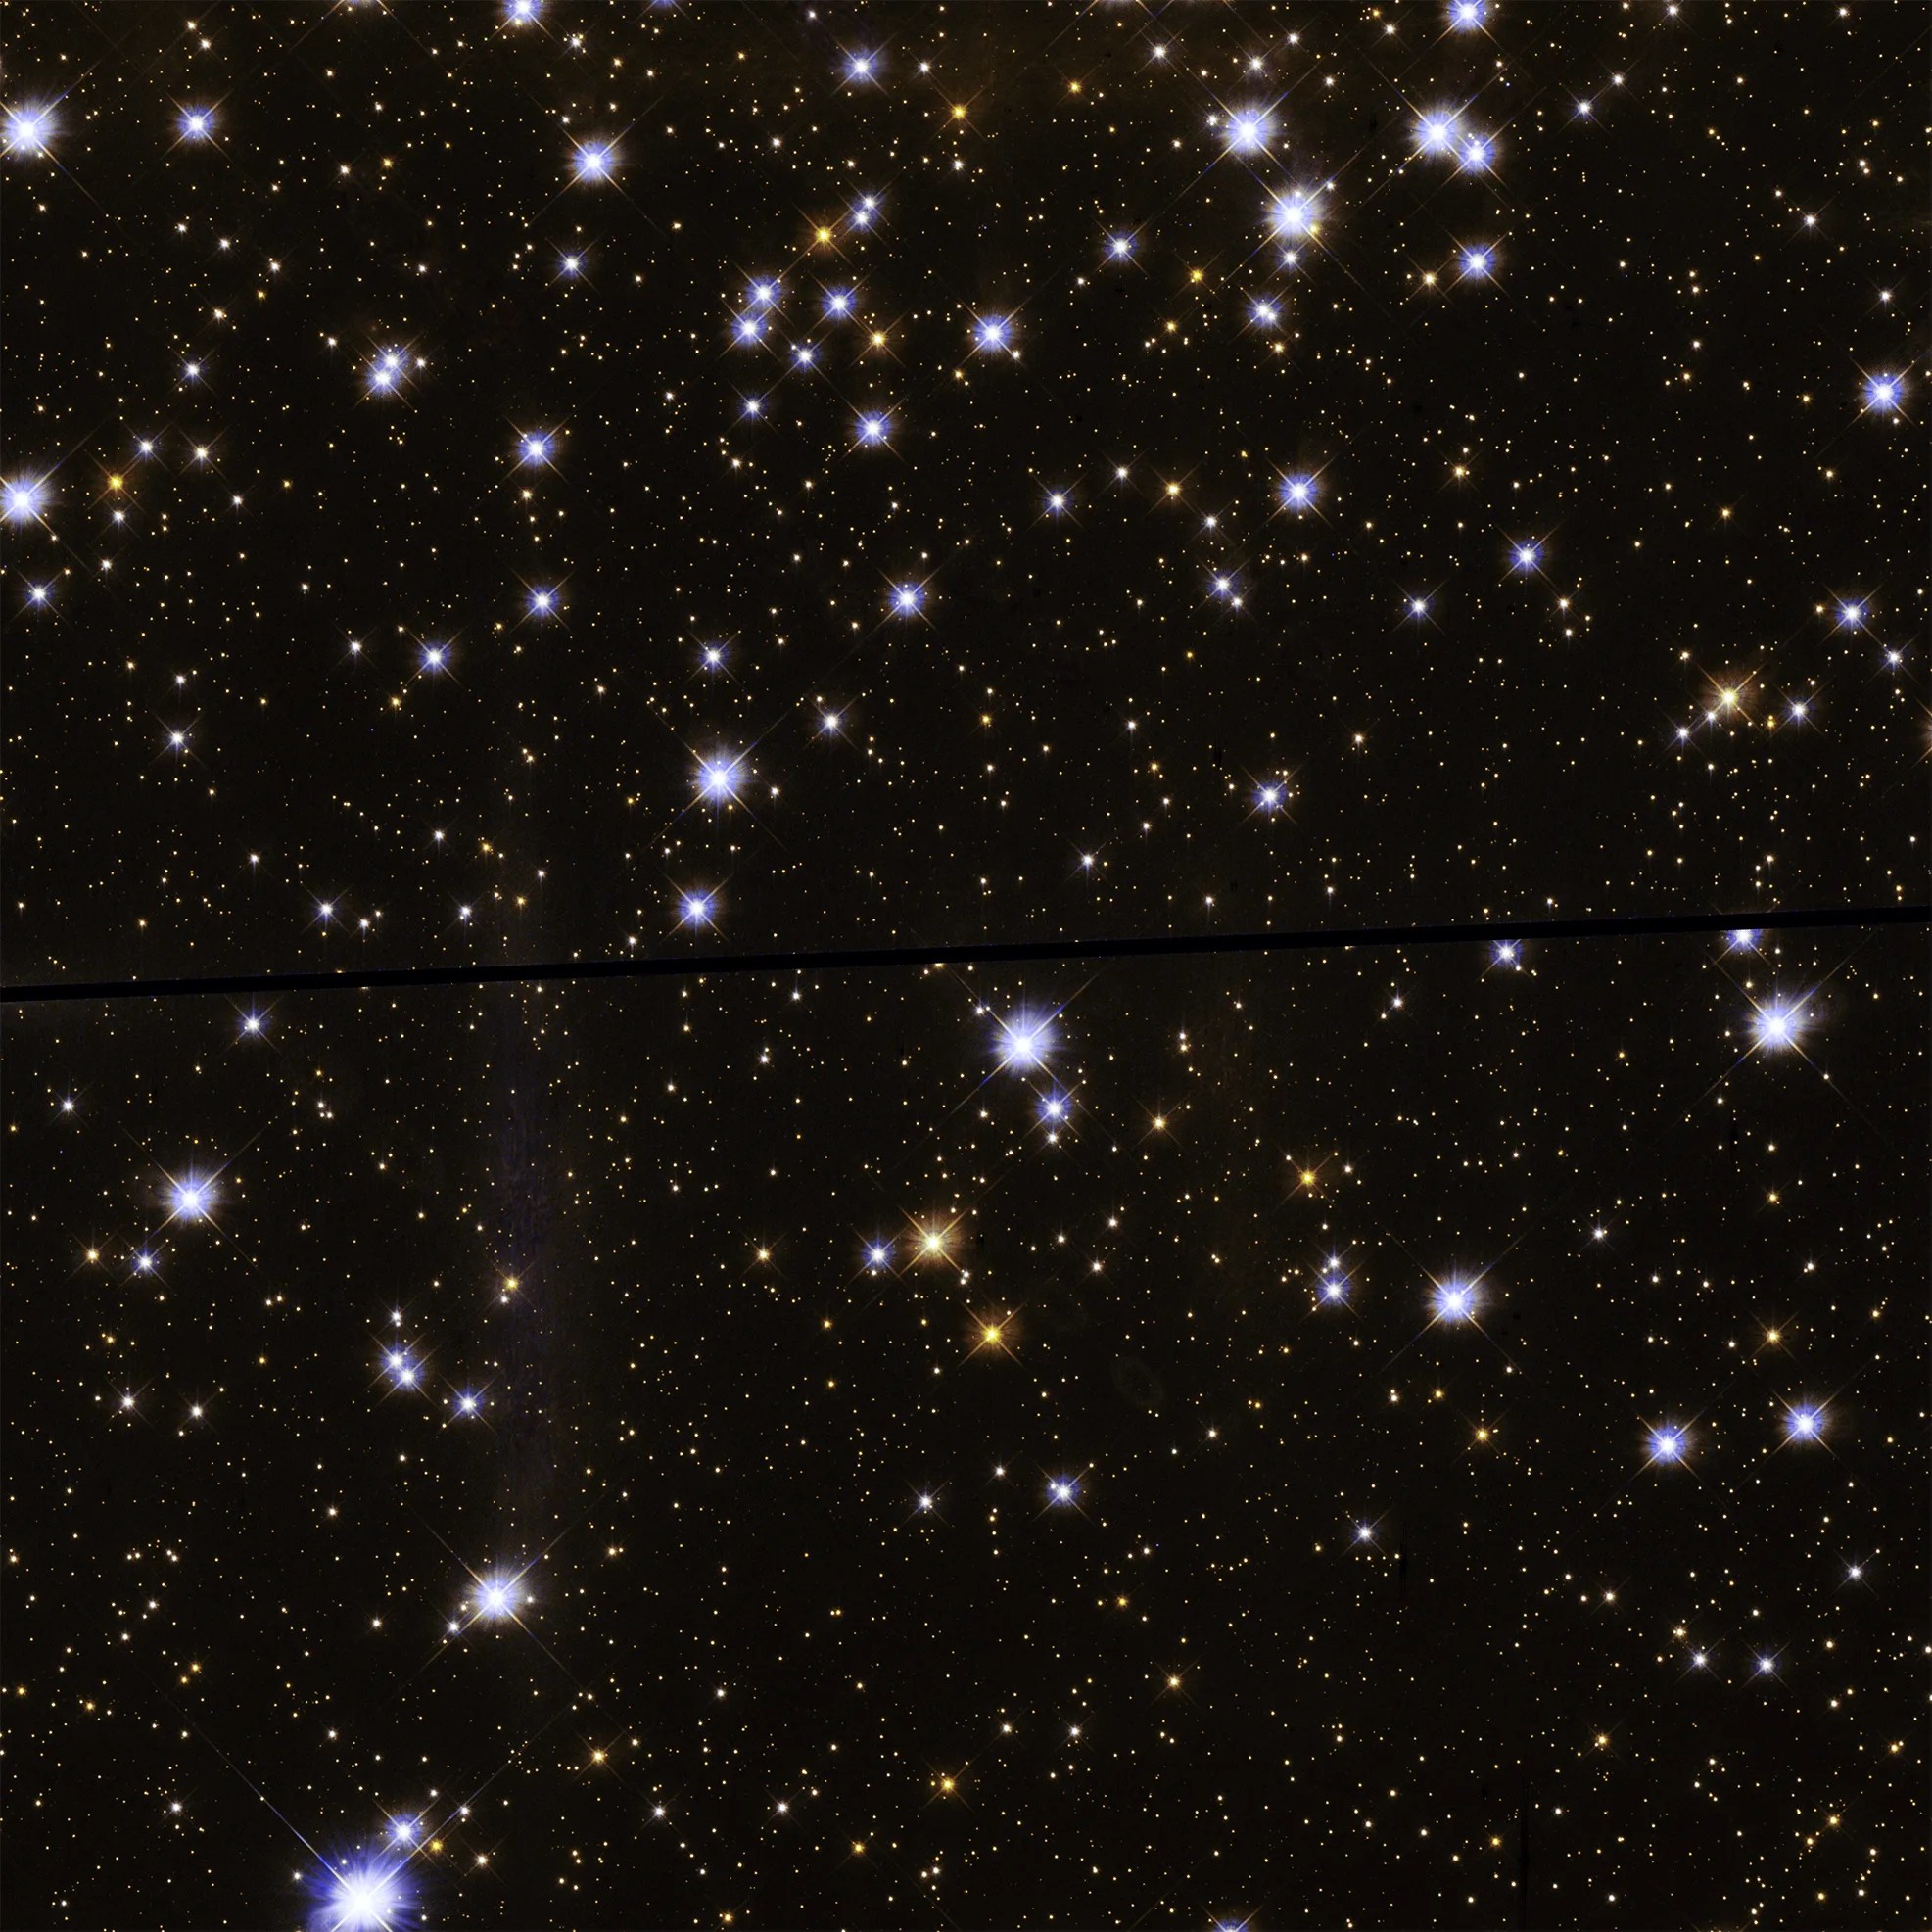 An open cluster of stars, with many small stars in the background and several larger white and yellow in the foreground.